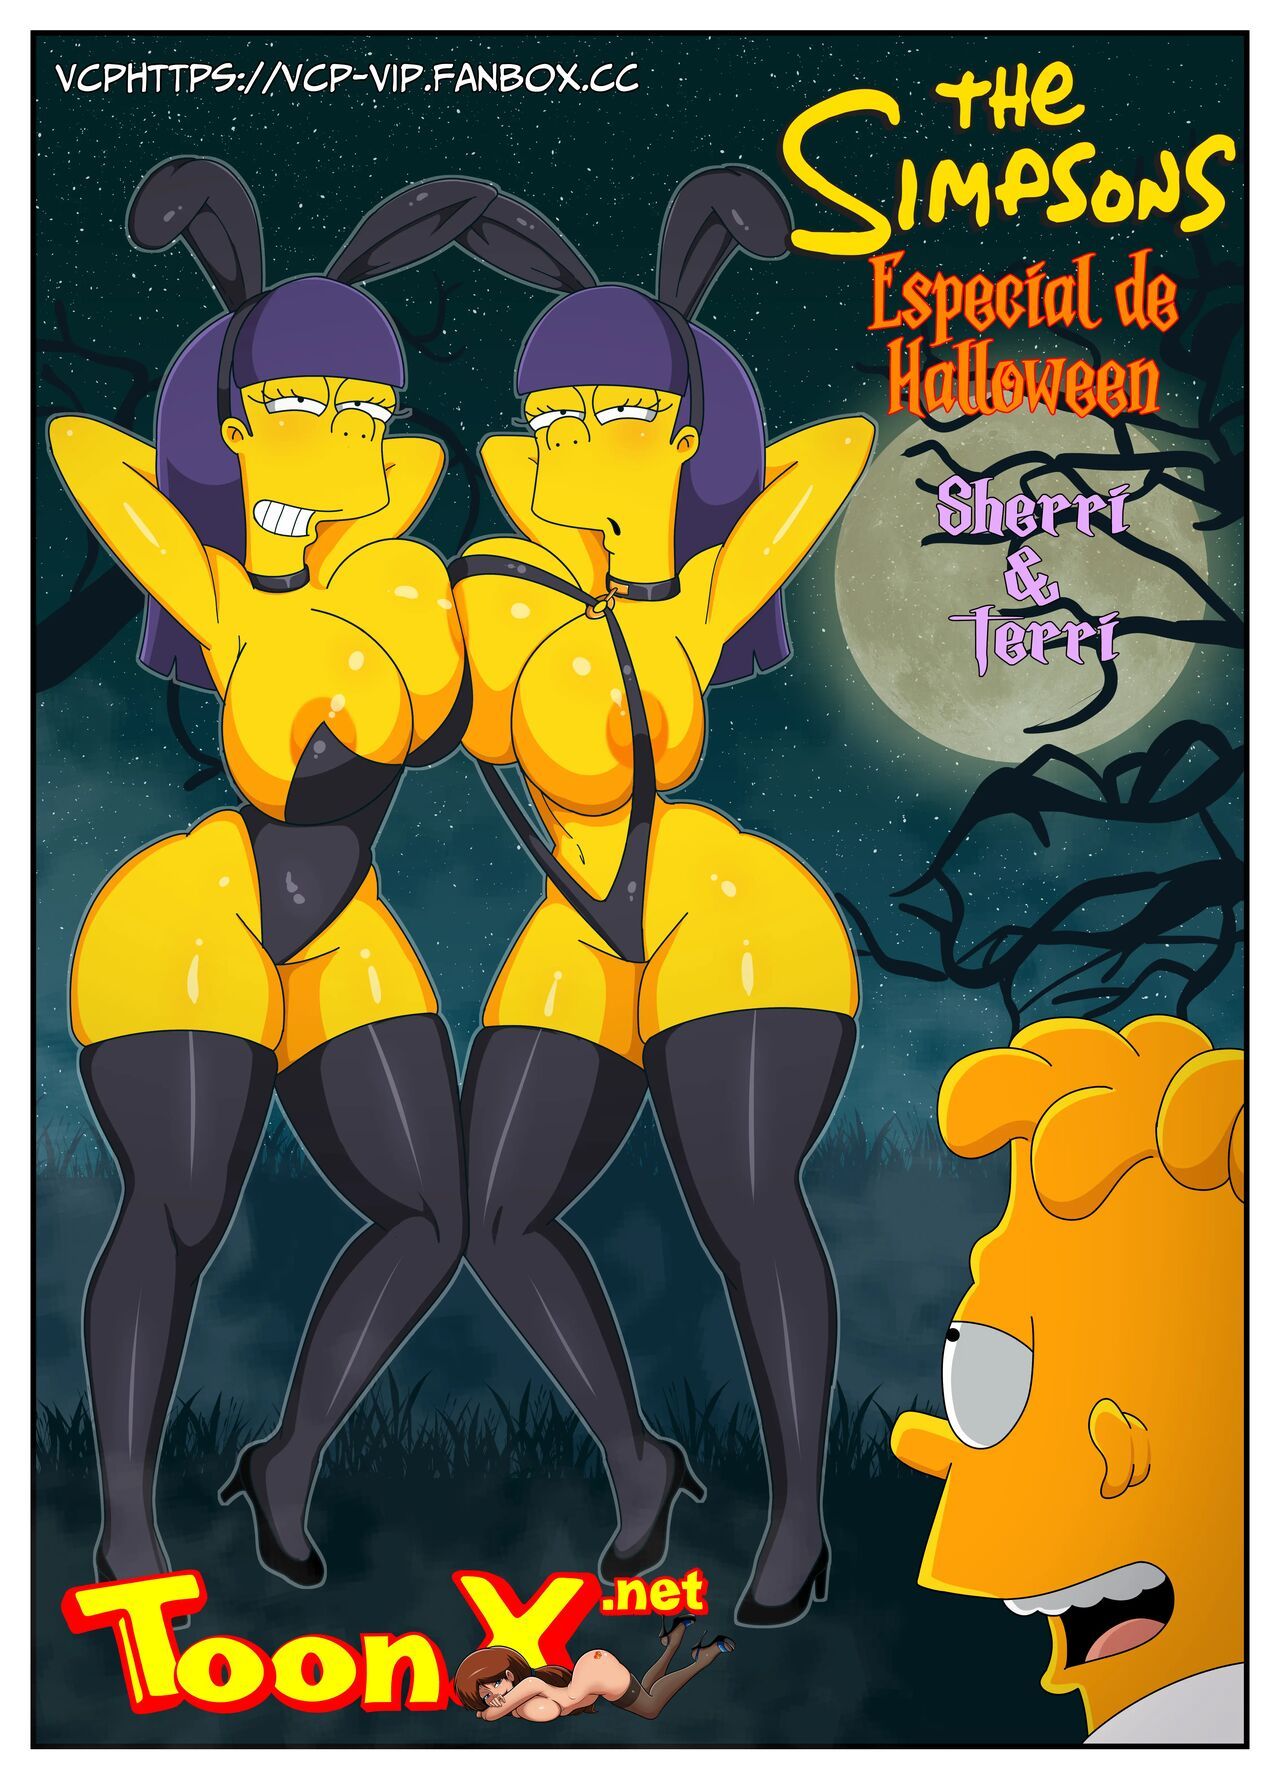 The Yellow Fantasy 5: Halloween Special: Sherry & Terry Porn Comic english 01